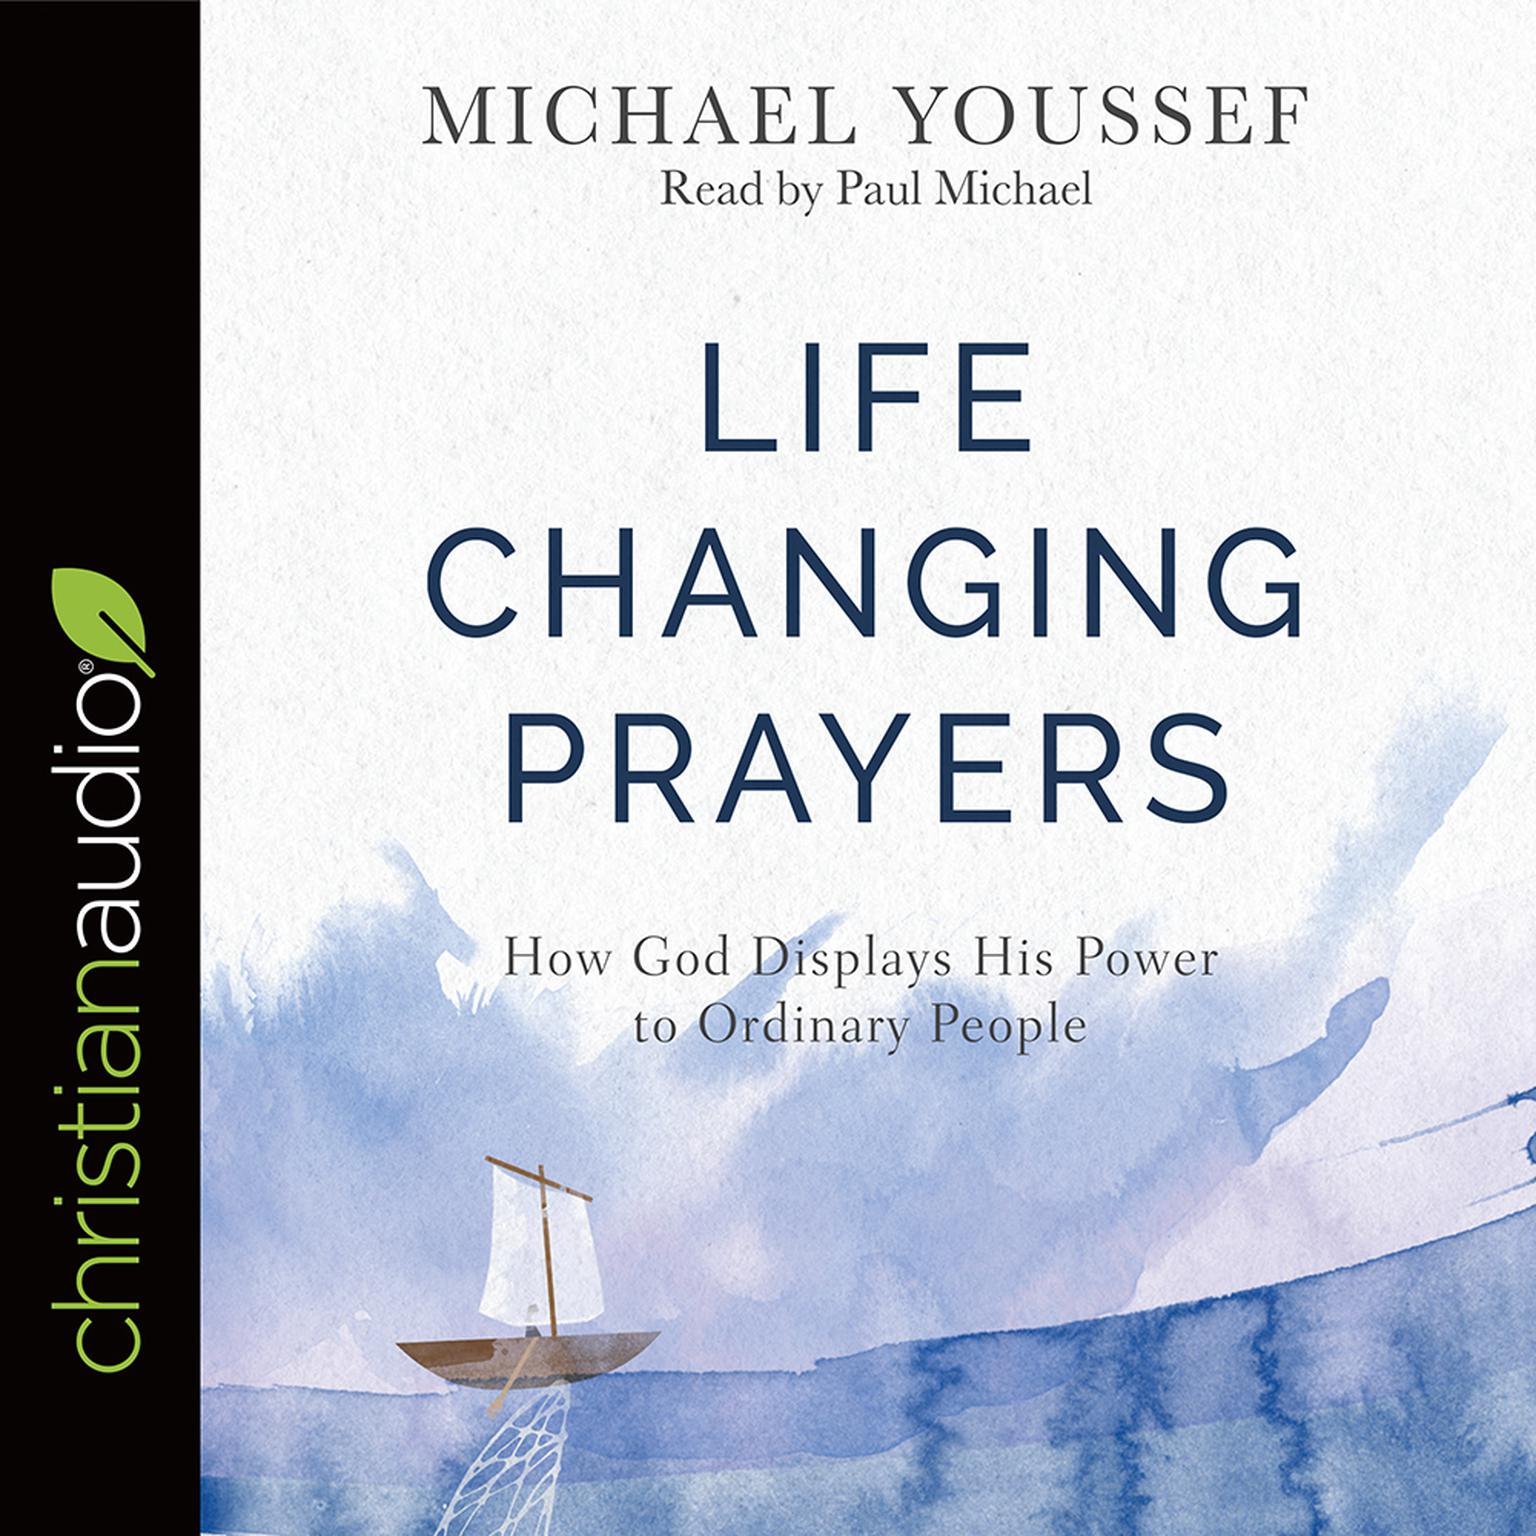 Life-Changing Prayers: How God Displays His Power to Ordinary People Audiobook, by Michael Youssef